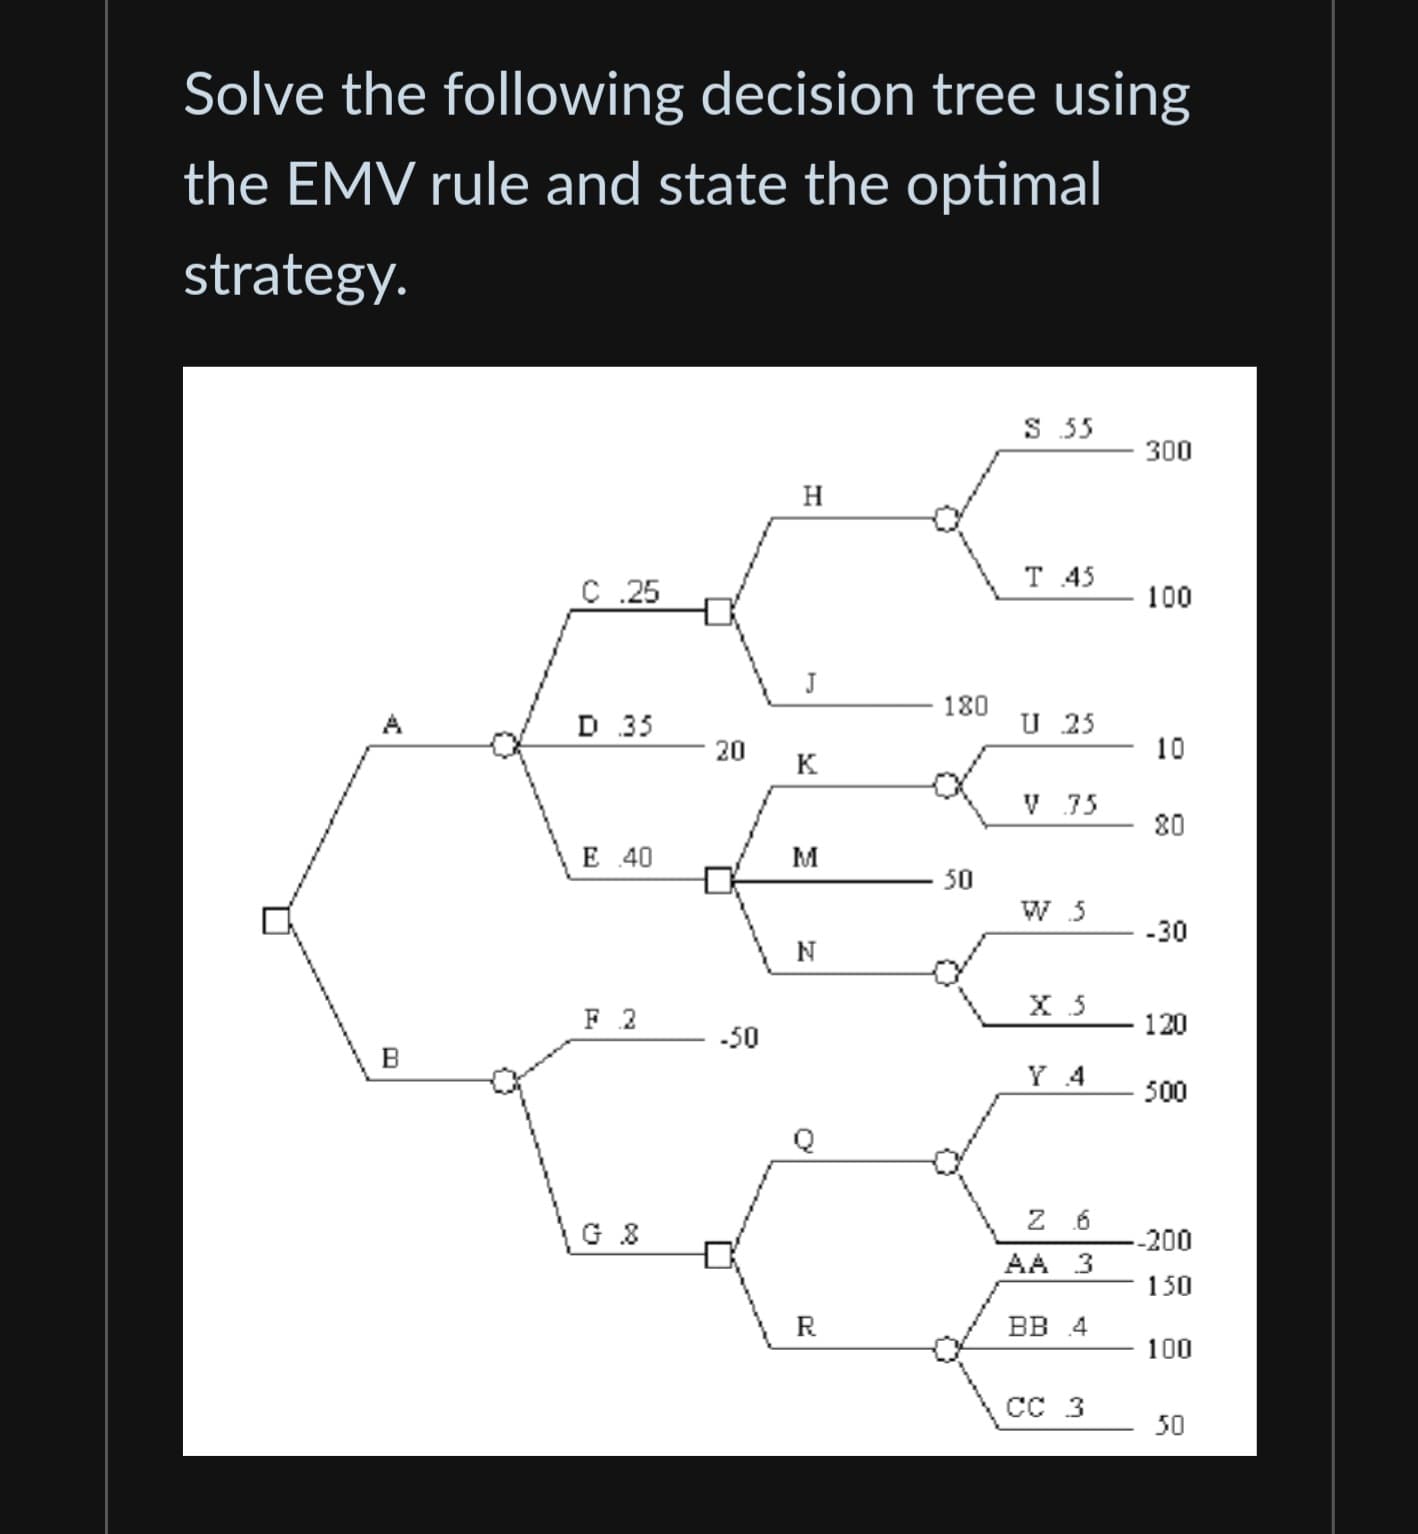 Solve the following decision tree using
the EMV rule and state the optimal
strategy.
B
C .25
D 35
E 40
F 2
G 8
20
-50
H
J
K
M
N
R
180
50
S 55
T 45
U 25
V 35
W S
X 5
Y 4
Z 6
AA 3
BB 4
CC 3
300
100
10
80
-30
120
500
--200
150
100
50